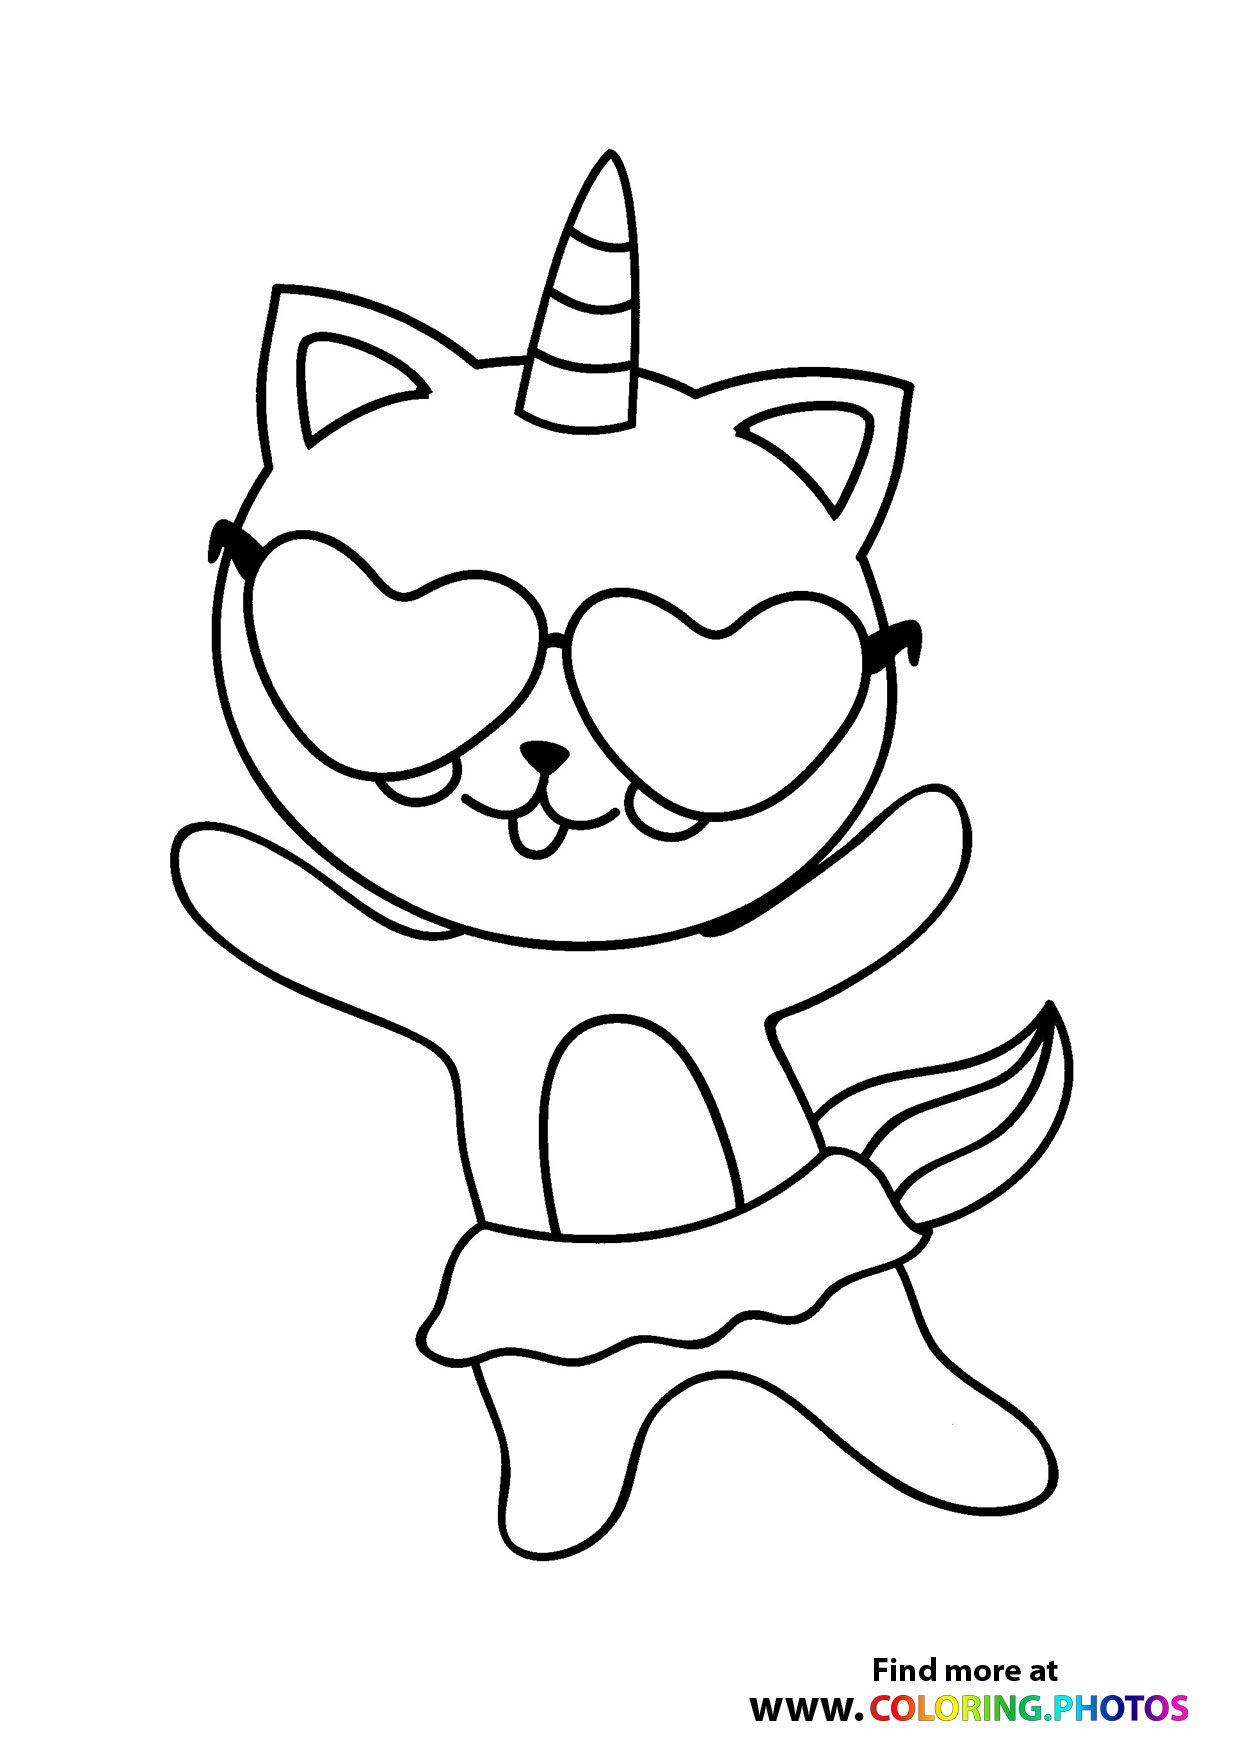 Cat with hart glasses - Coloring Pages for kids